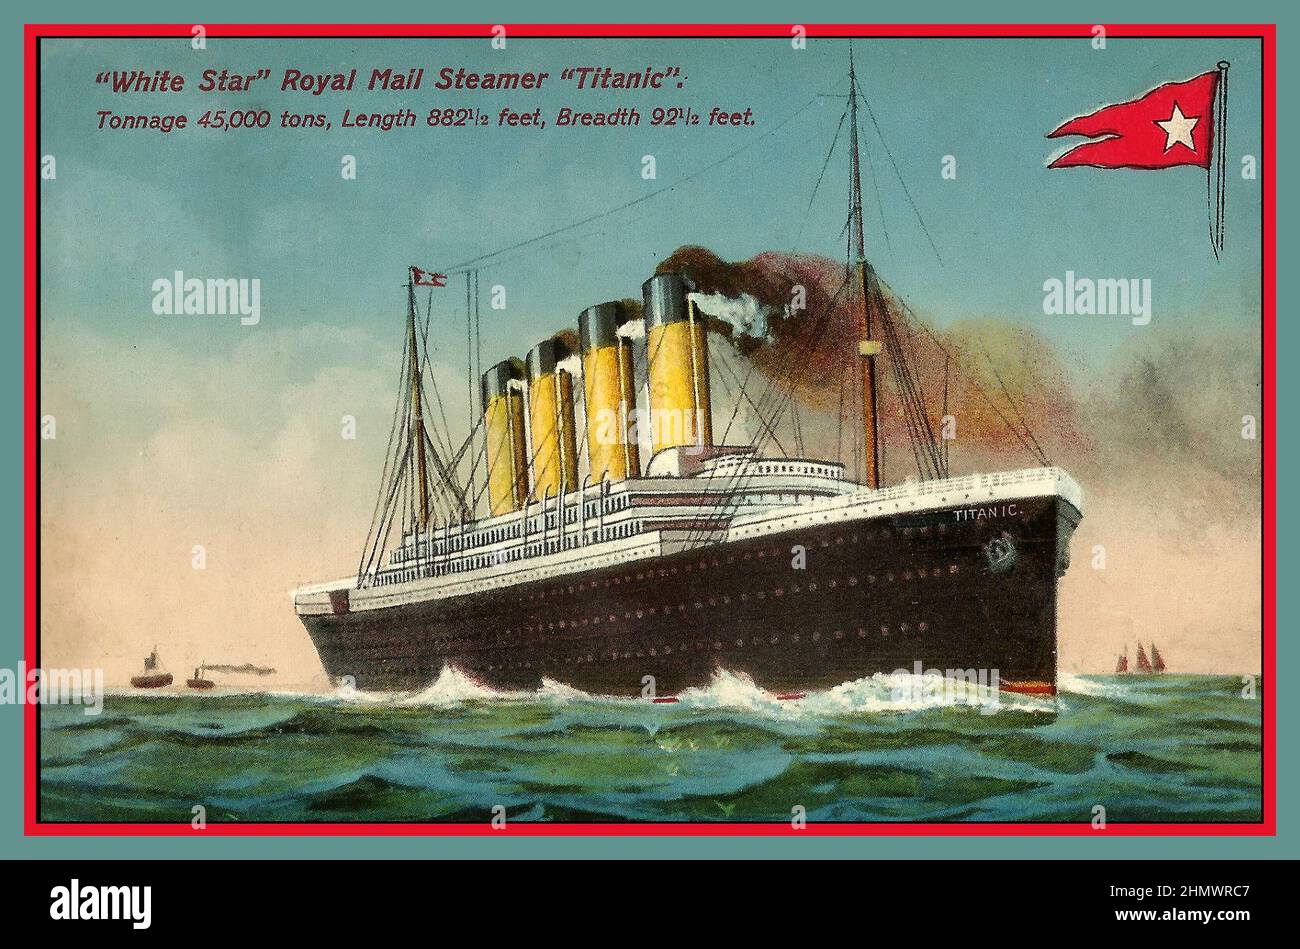 RMS TITANIC 1912 ILLUSTRATION POSTER CARD  Vintage 1912 Titanic ‘White Star Royal Mail Steamer’ tonnage 45000  Promotional Colour Postcard From The White Star Line before its tragic sinking Stock Photo